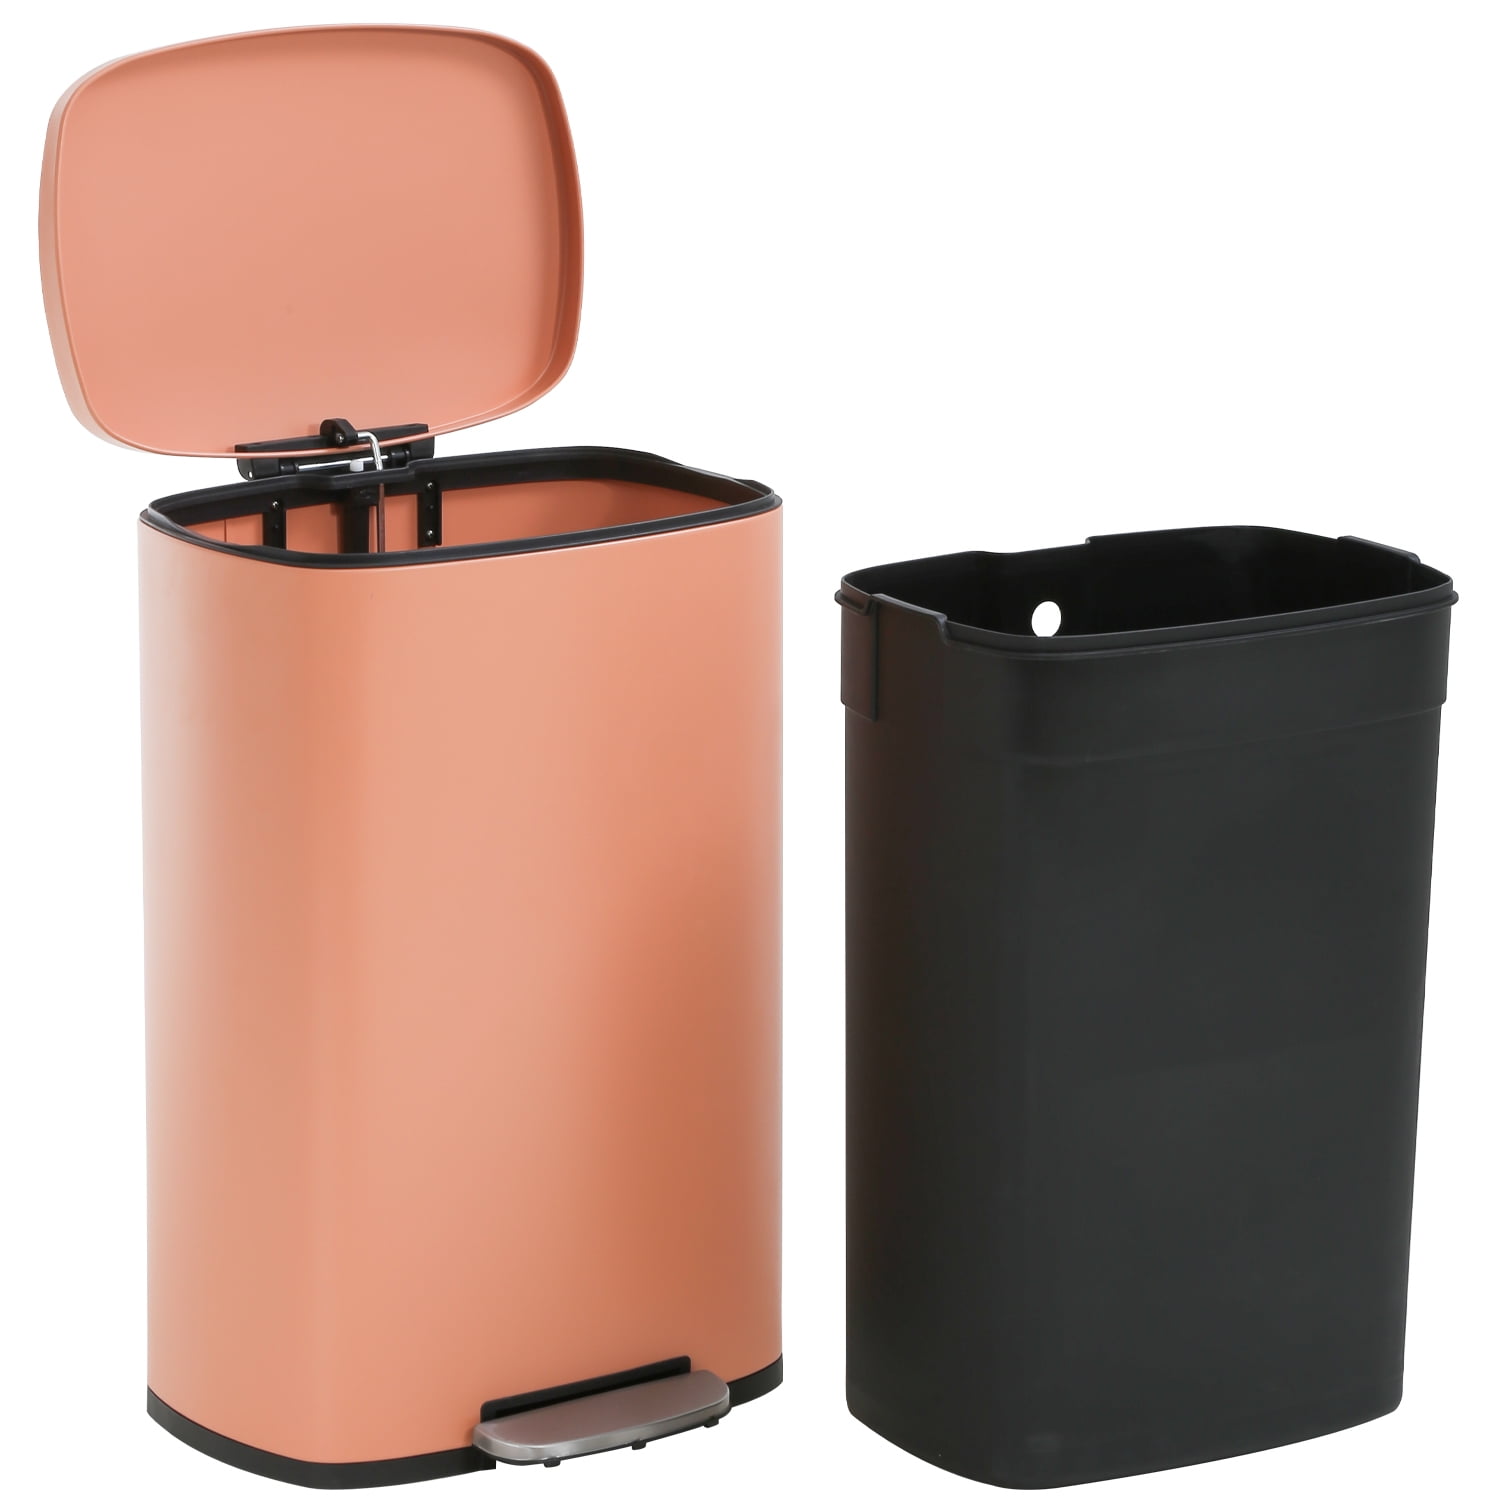 Trash can with lid Outdoor Trash can for Patio Home & Comforts Plastic Waste Bin Kitchen Trash can 13 Gallon Kitchen Wastebasket Garden Garbage Bin Black Camping Trash can. 